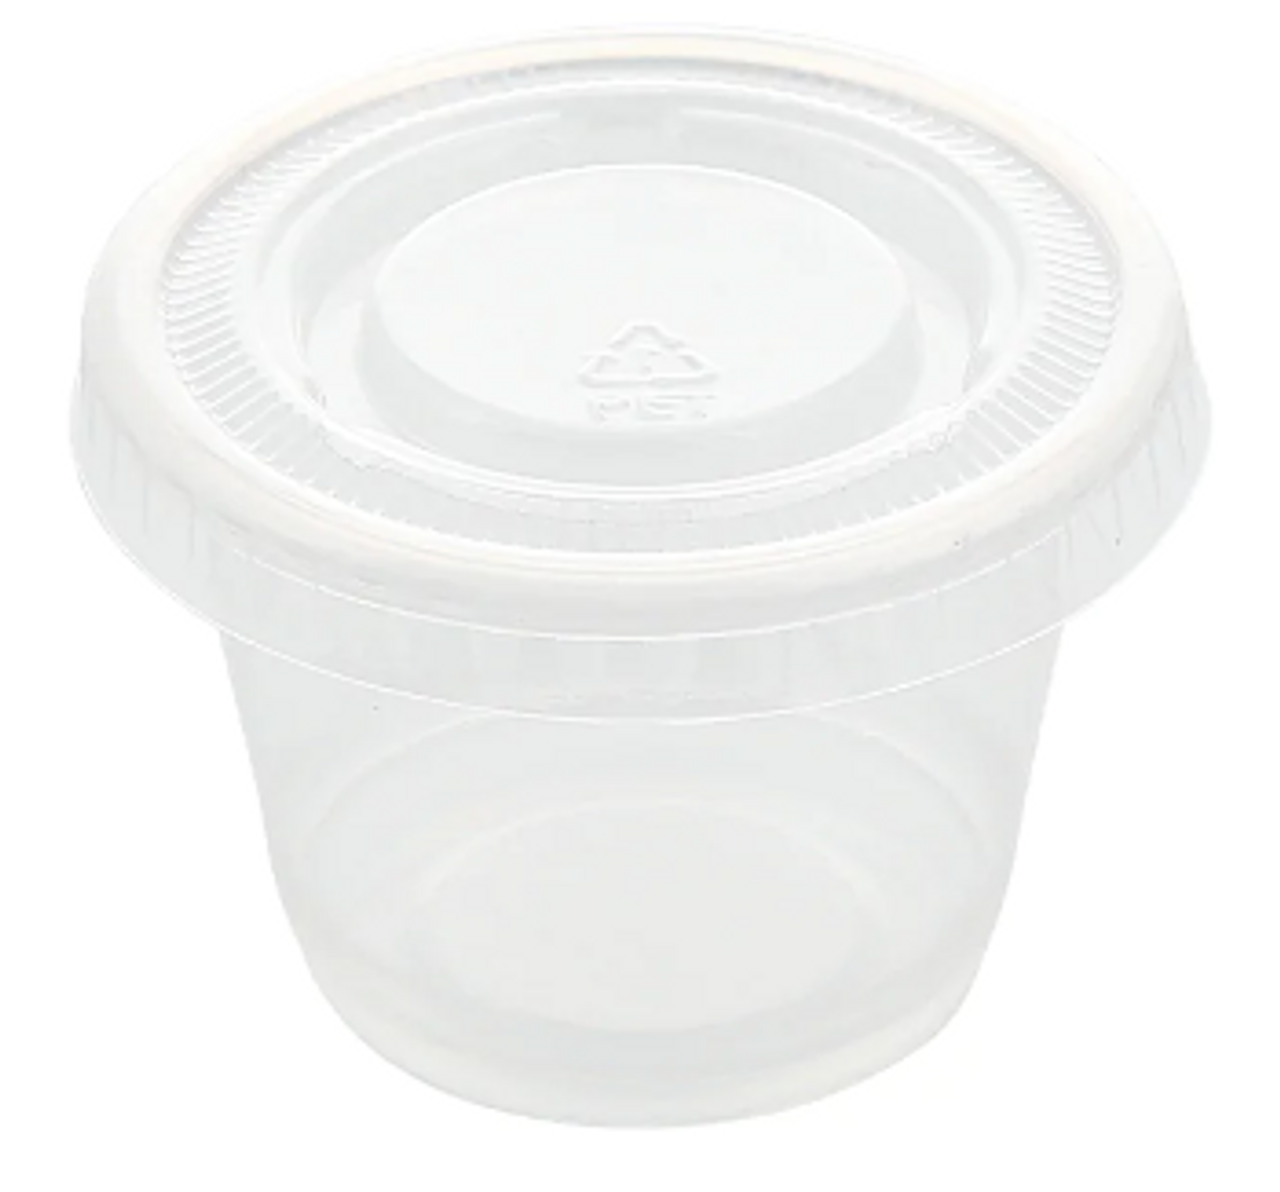 16 oz. BPA Free Food Grade Freezer Grade Round Container with Lid  (T31416FCP & T31416FCLCP)- starting quantity 30 count - FREE SHIPPING